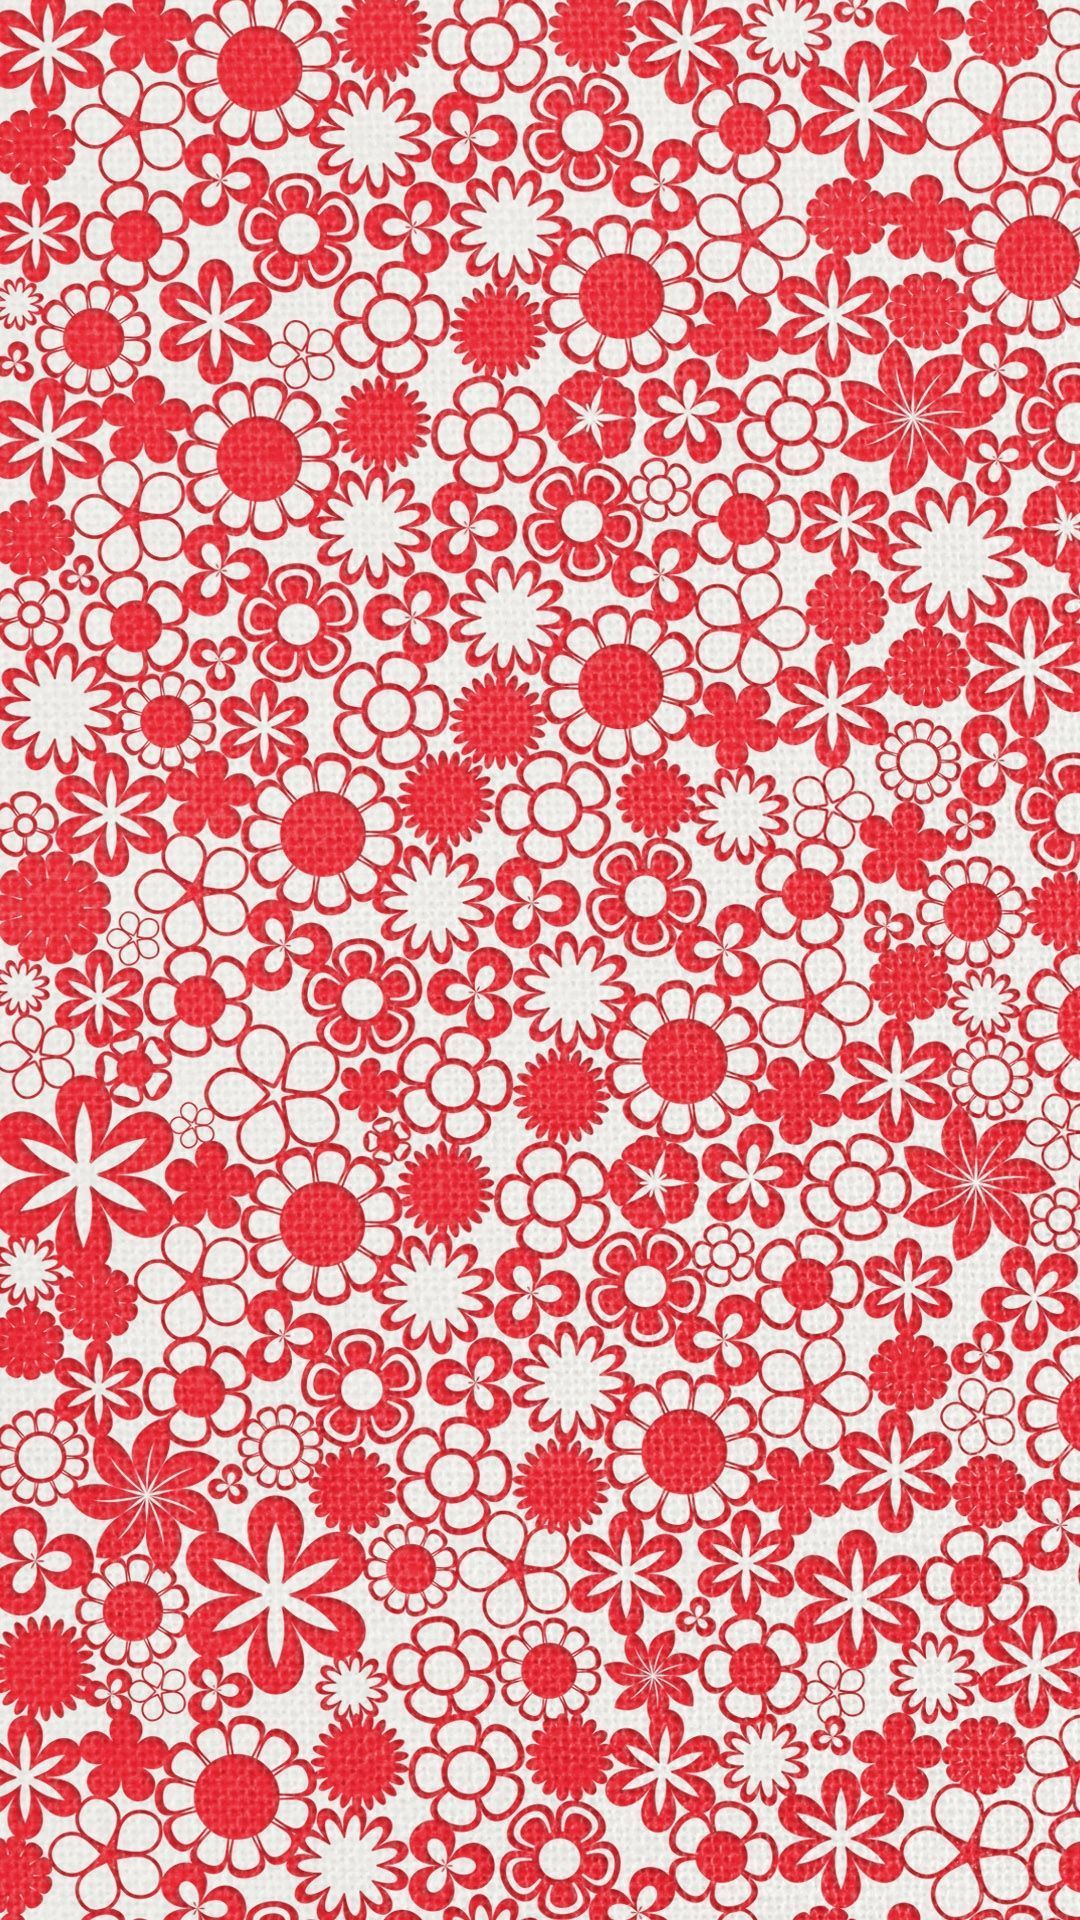 iPhone 6 Wallpapers: Flower Patterns - iPhone6wp.com